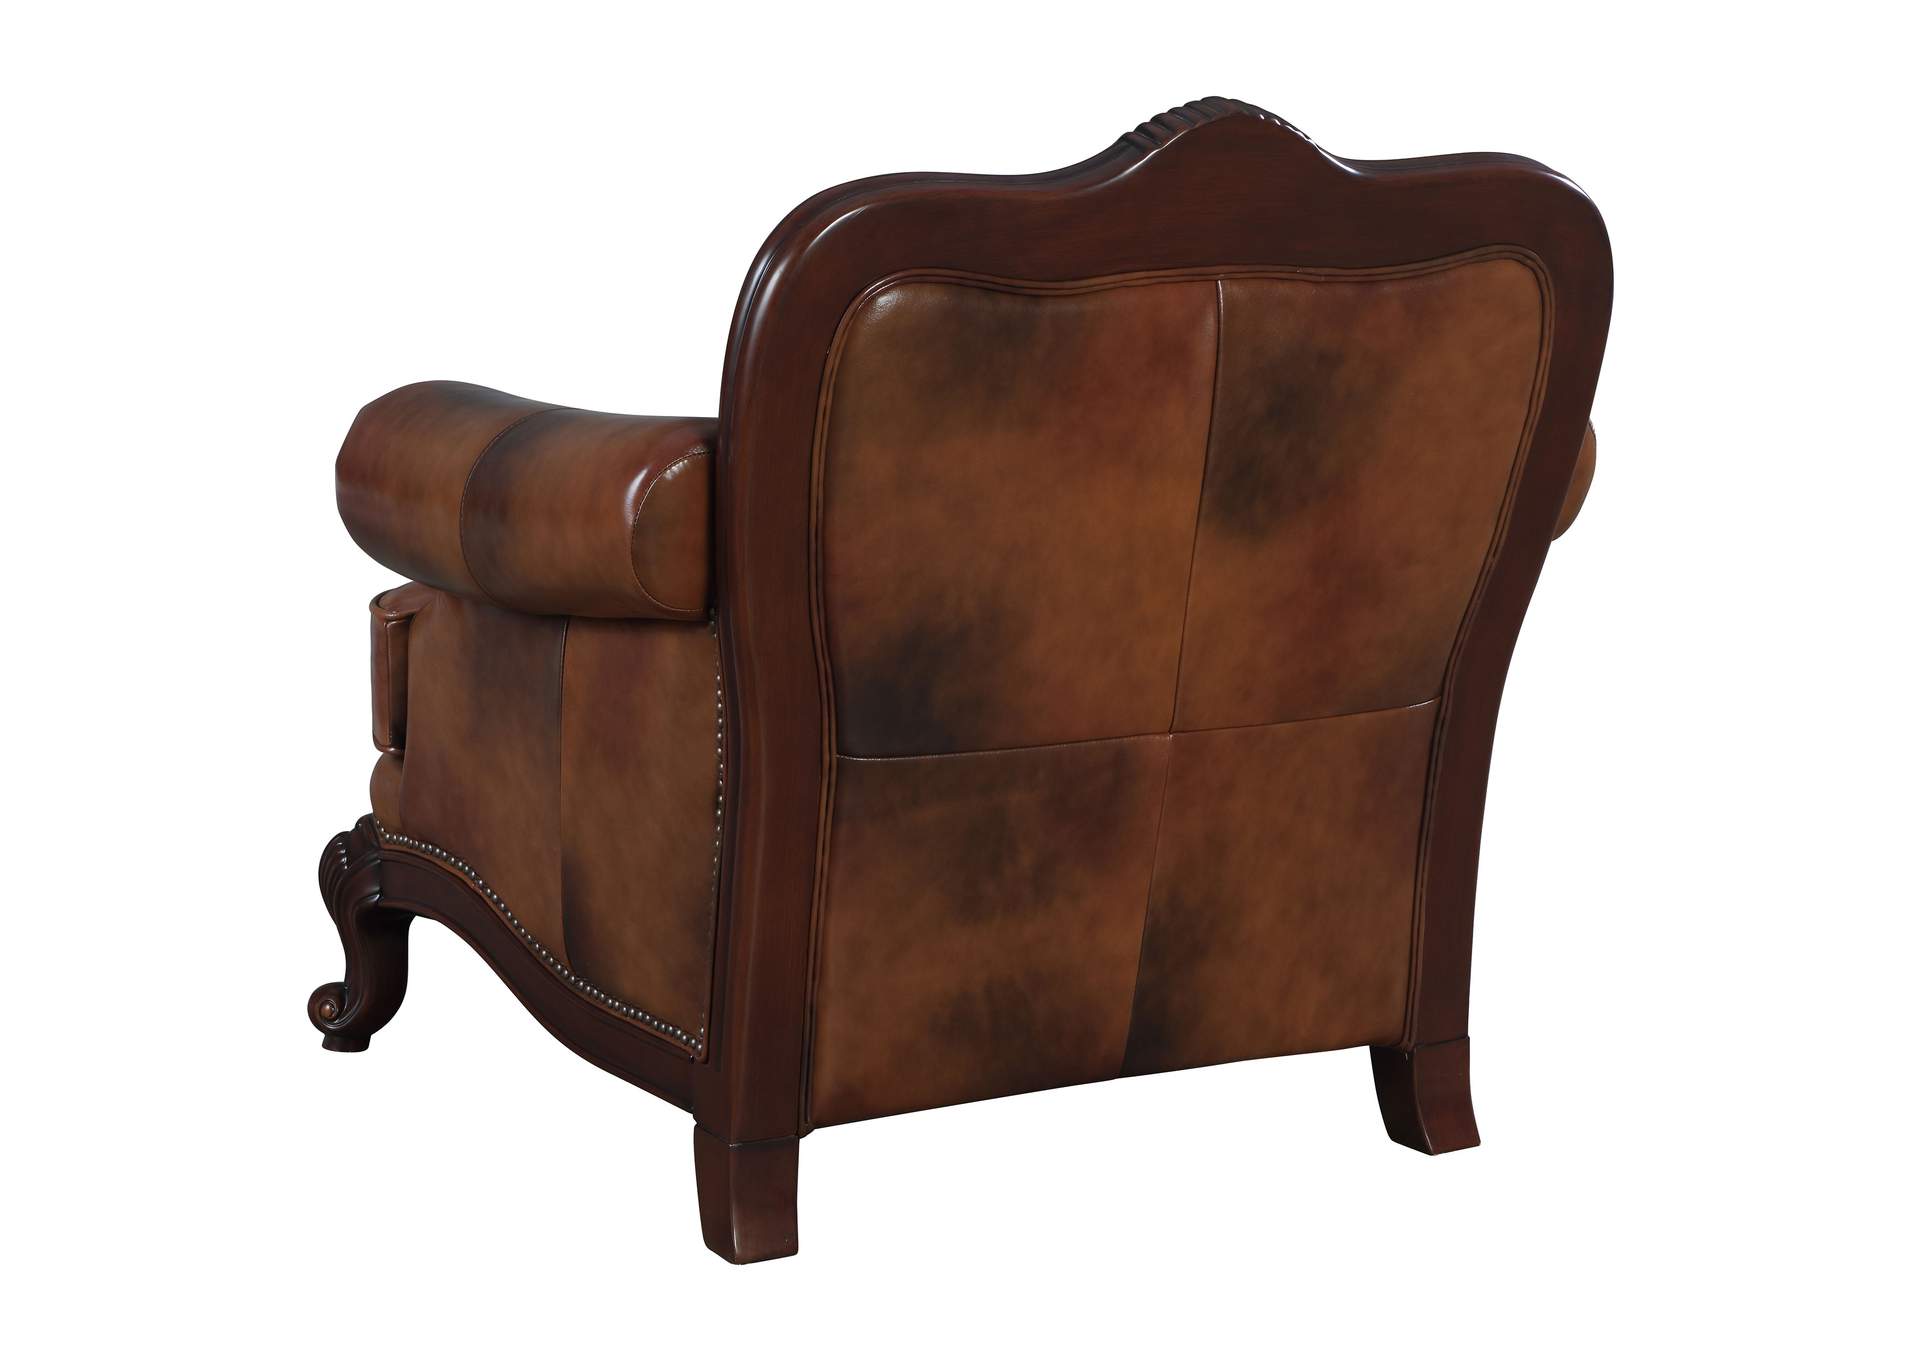 Victoria Rolled Arm Chair Tri-tone and Brown,Coaster Furniture